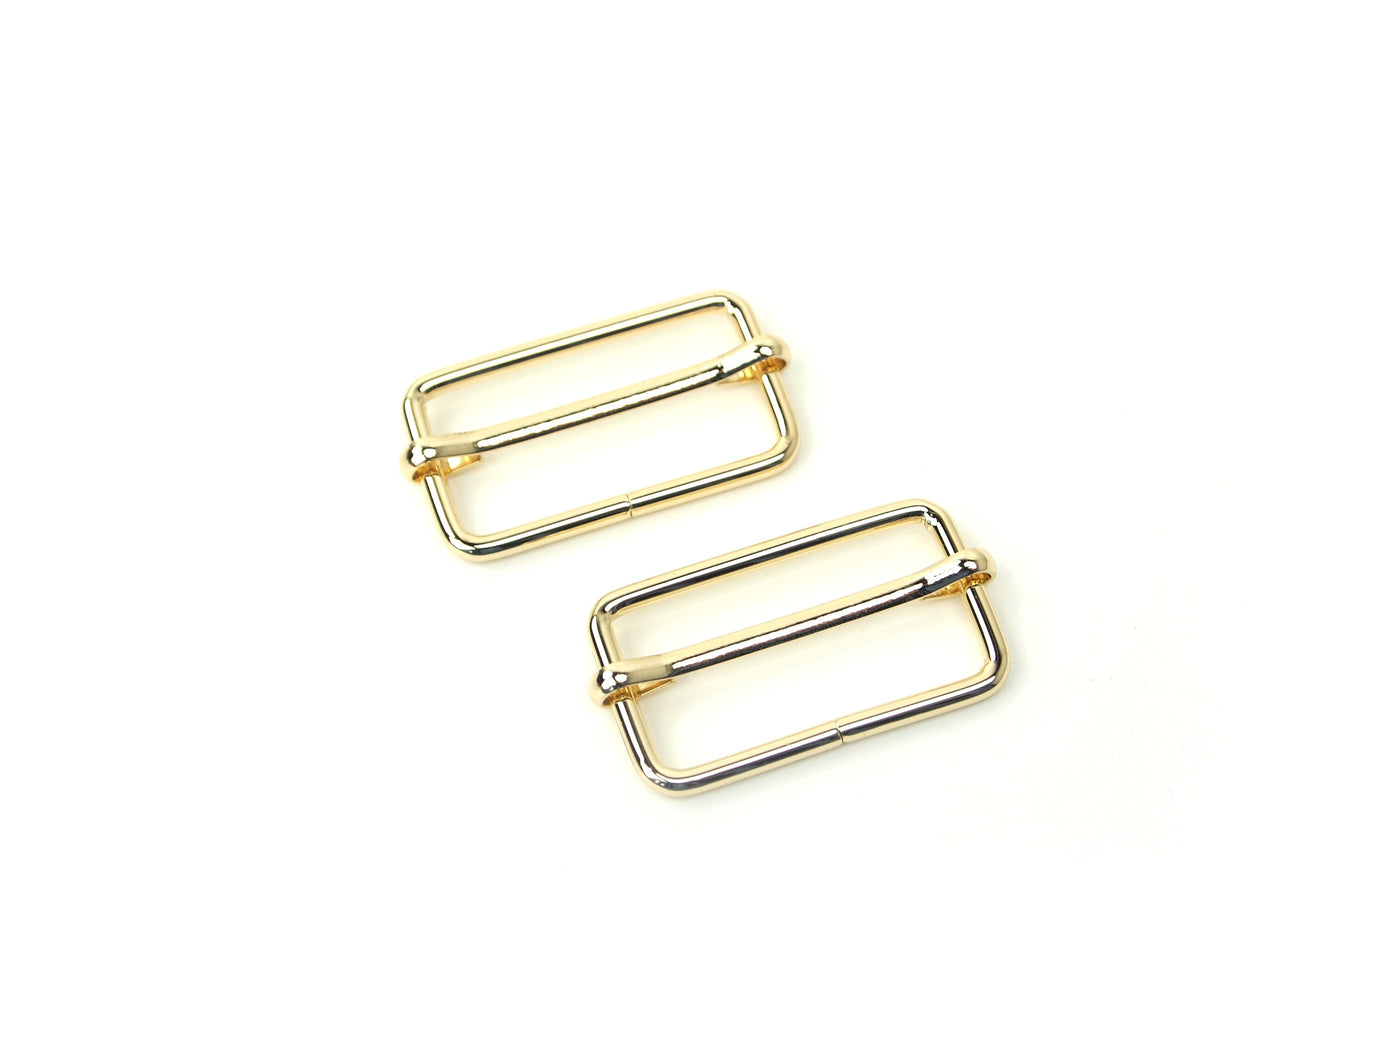 Two 1 1/2" Slider Buckles